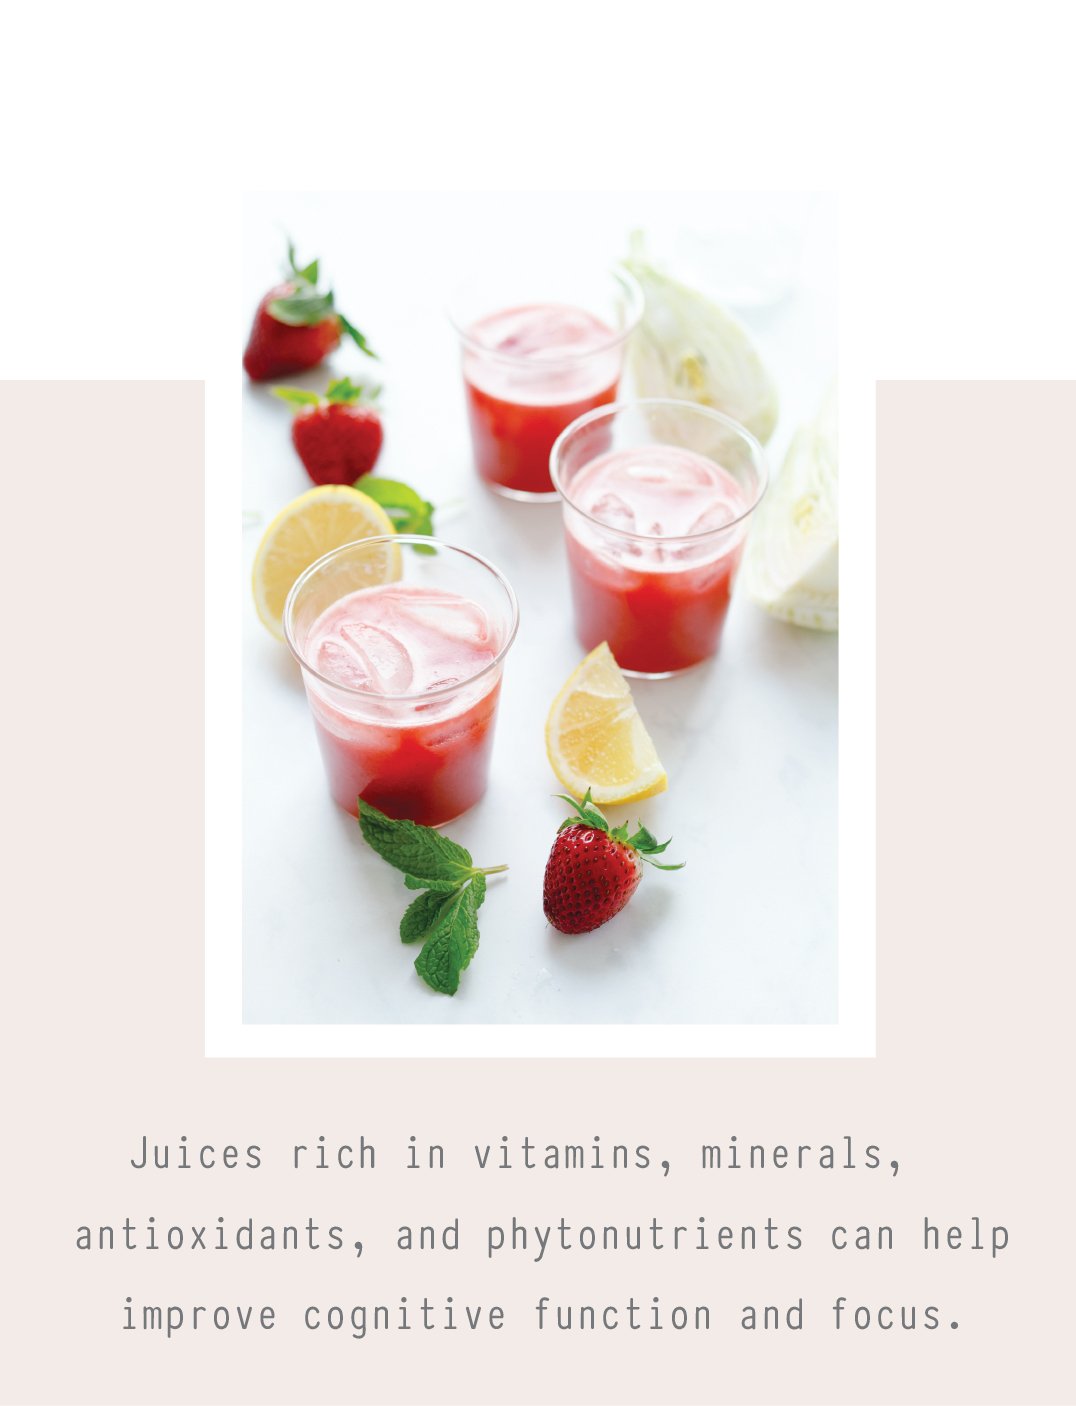 Juices rich in vitamins, minerals, antioxidants, and phytonutrients can help improve cognitive function and focus.